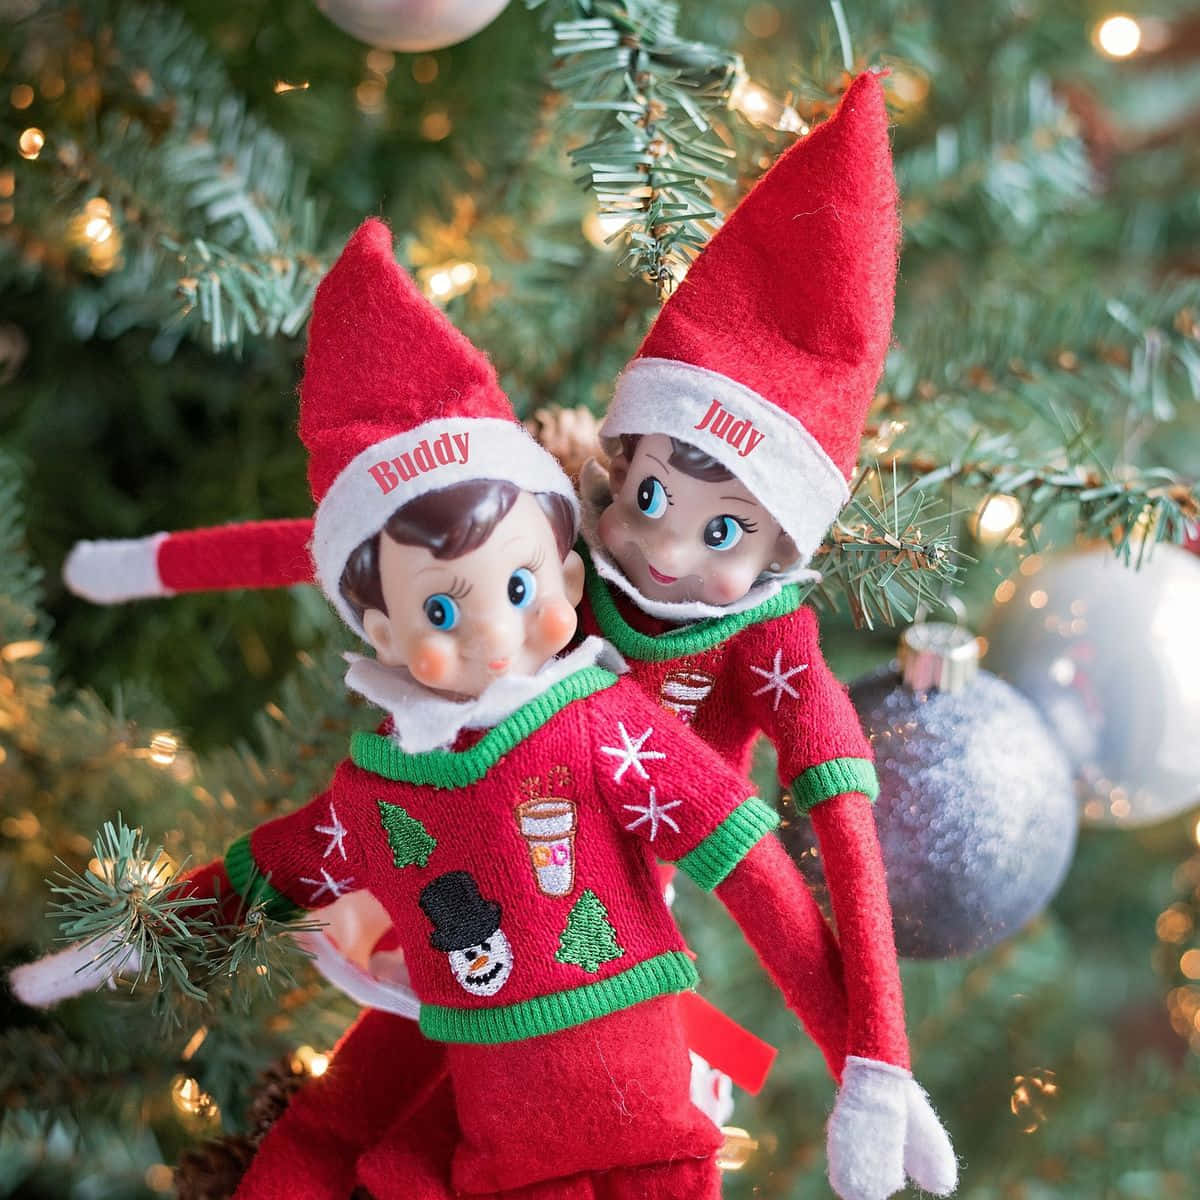 Delivering holiday cheer with Christmas elves! Wallpaper